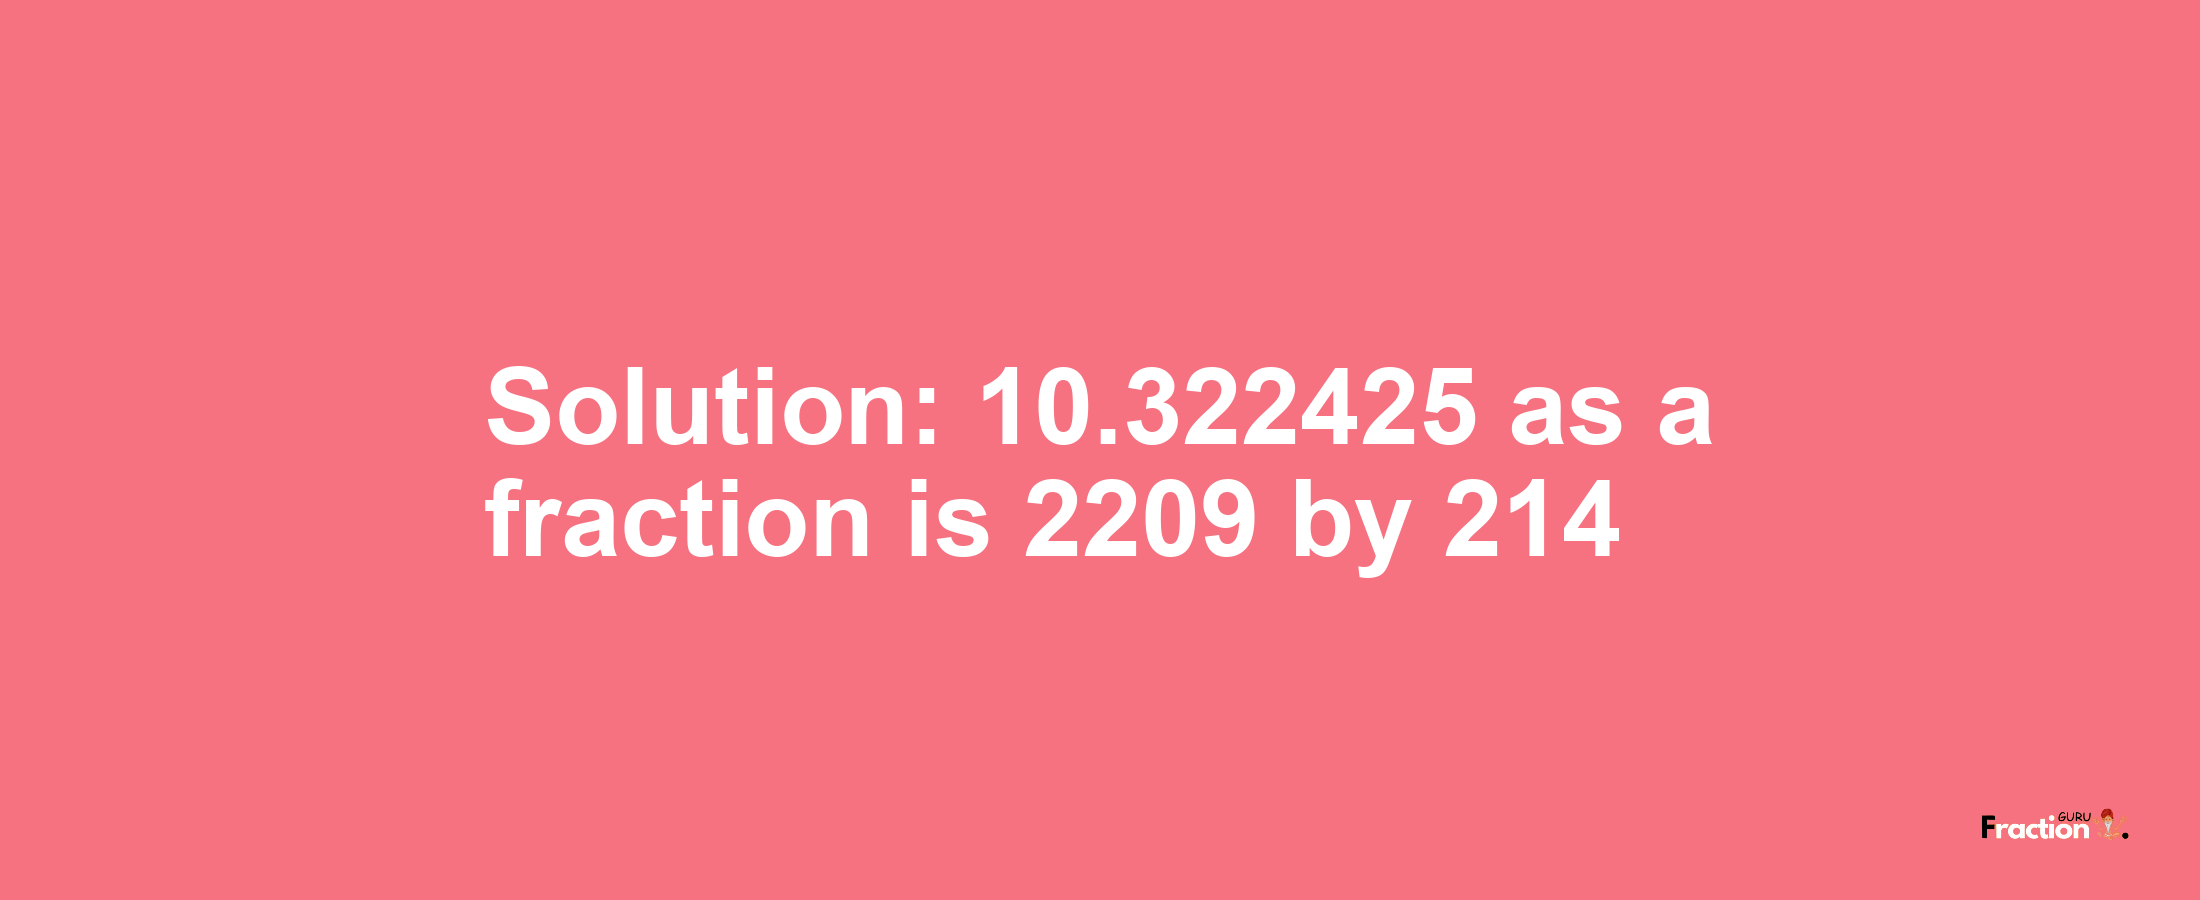 Solution:10.322425 as a fraction is 2209/214